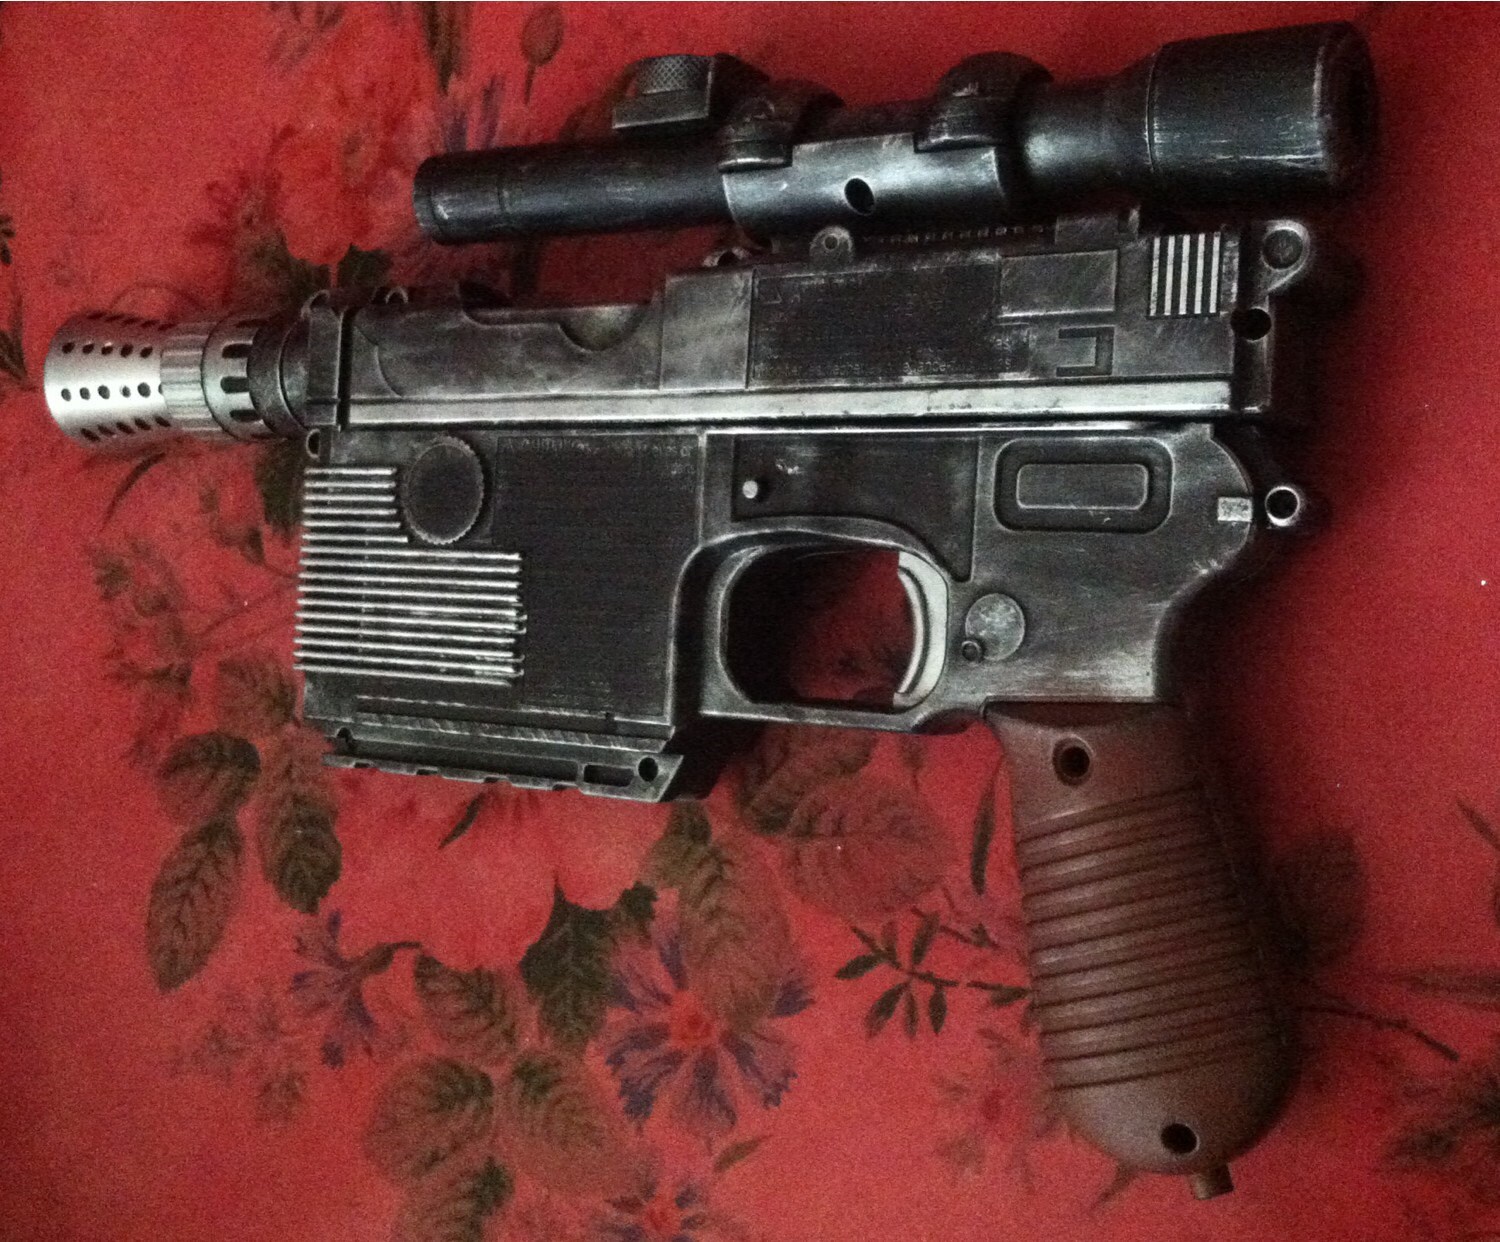 Star Wars Han Solo DL44 NERF Blaster Toy by TheUrbanCloth